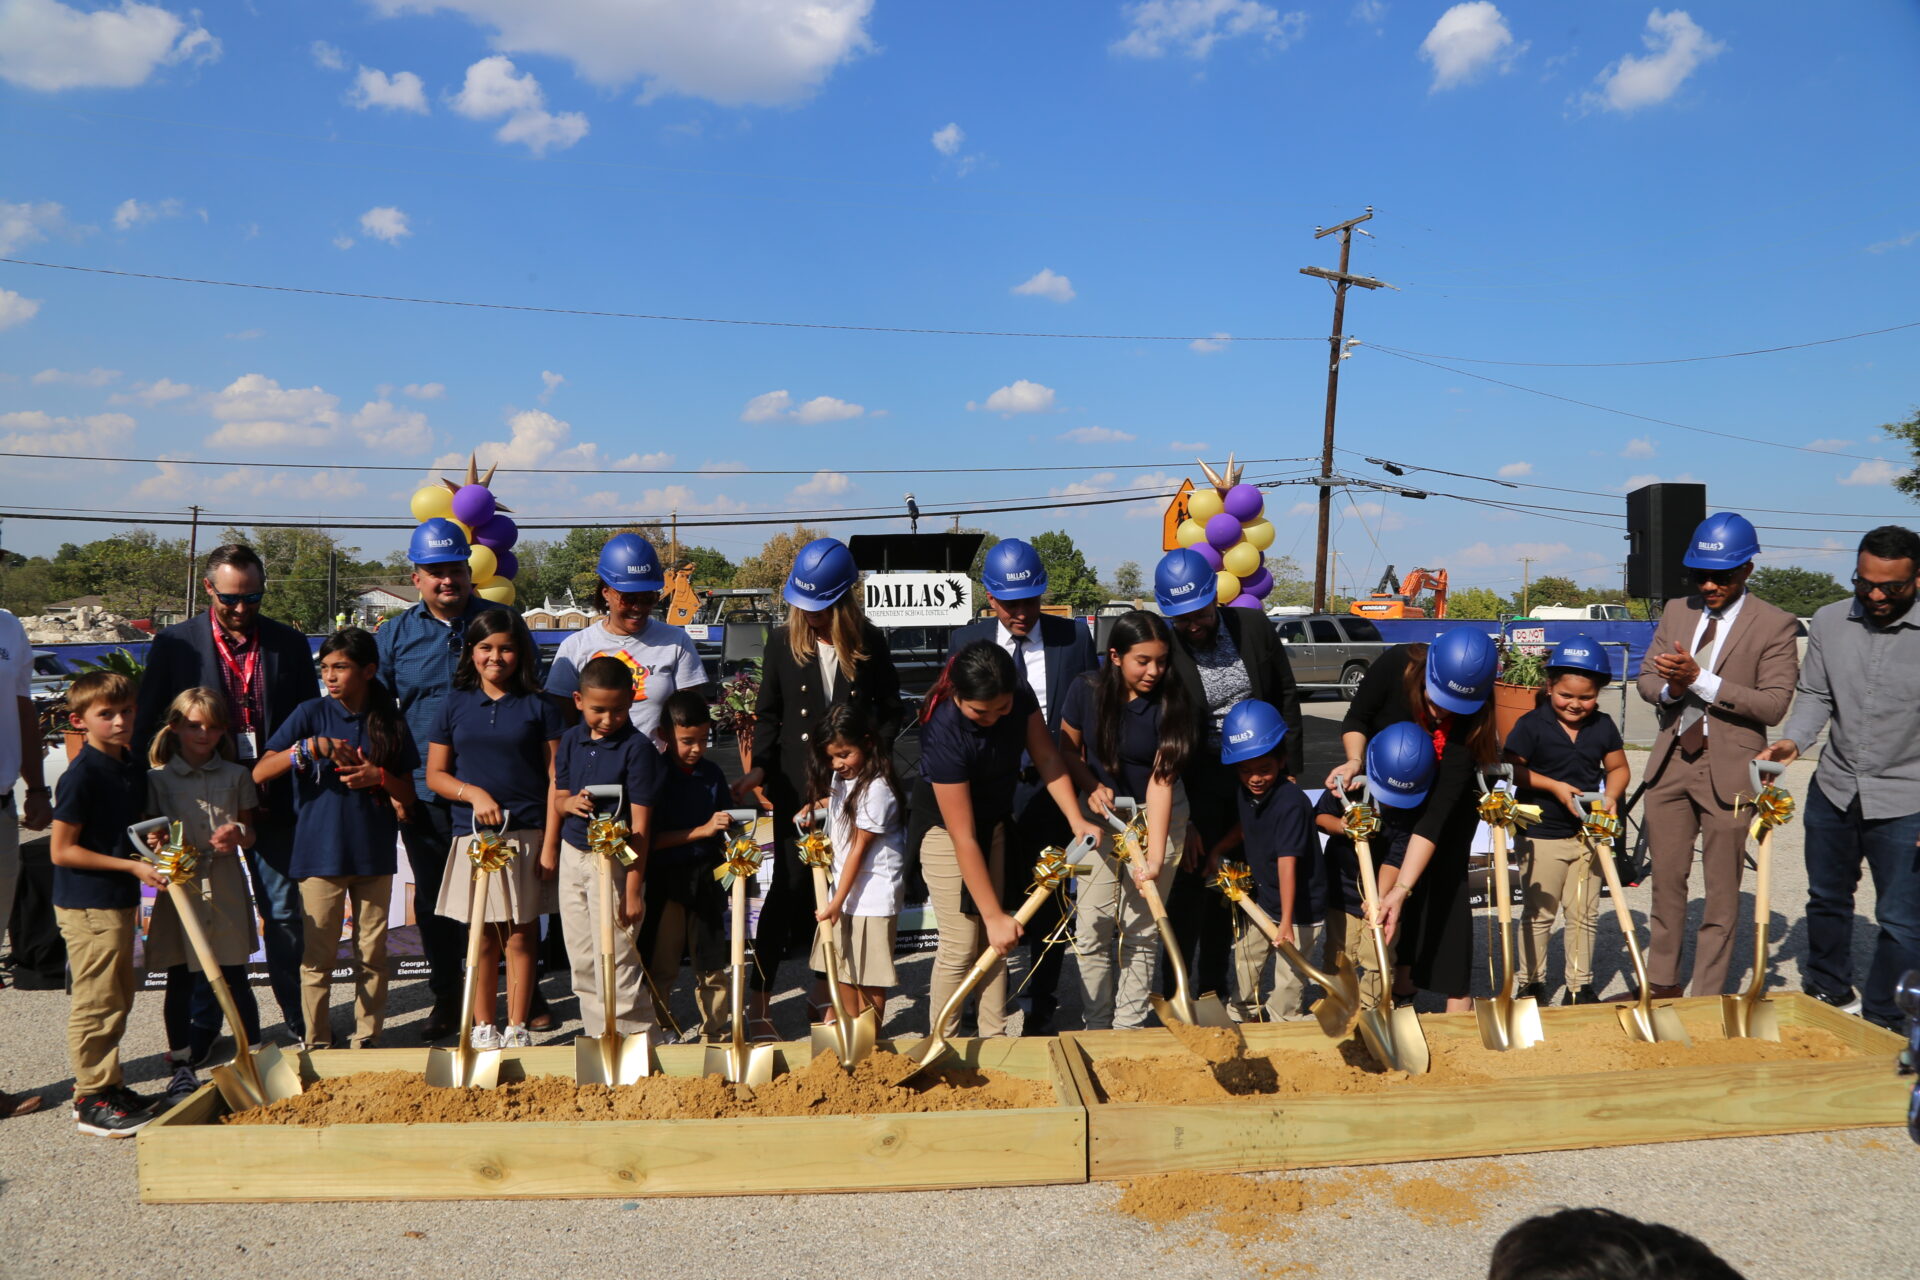 Students helping shovel at the groundbreaking for Dallas ISD's George Peabody Elementary